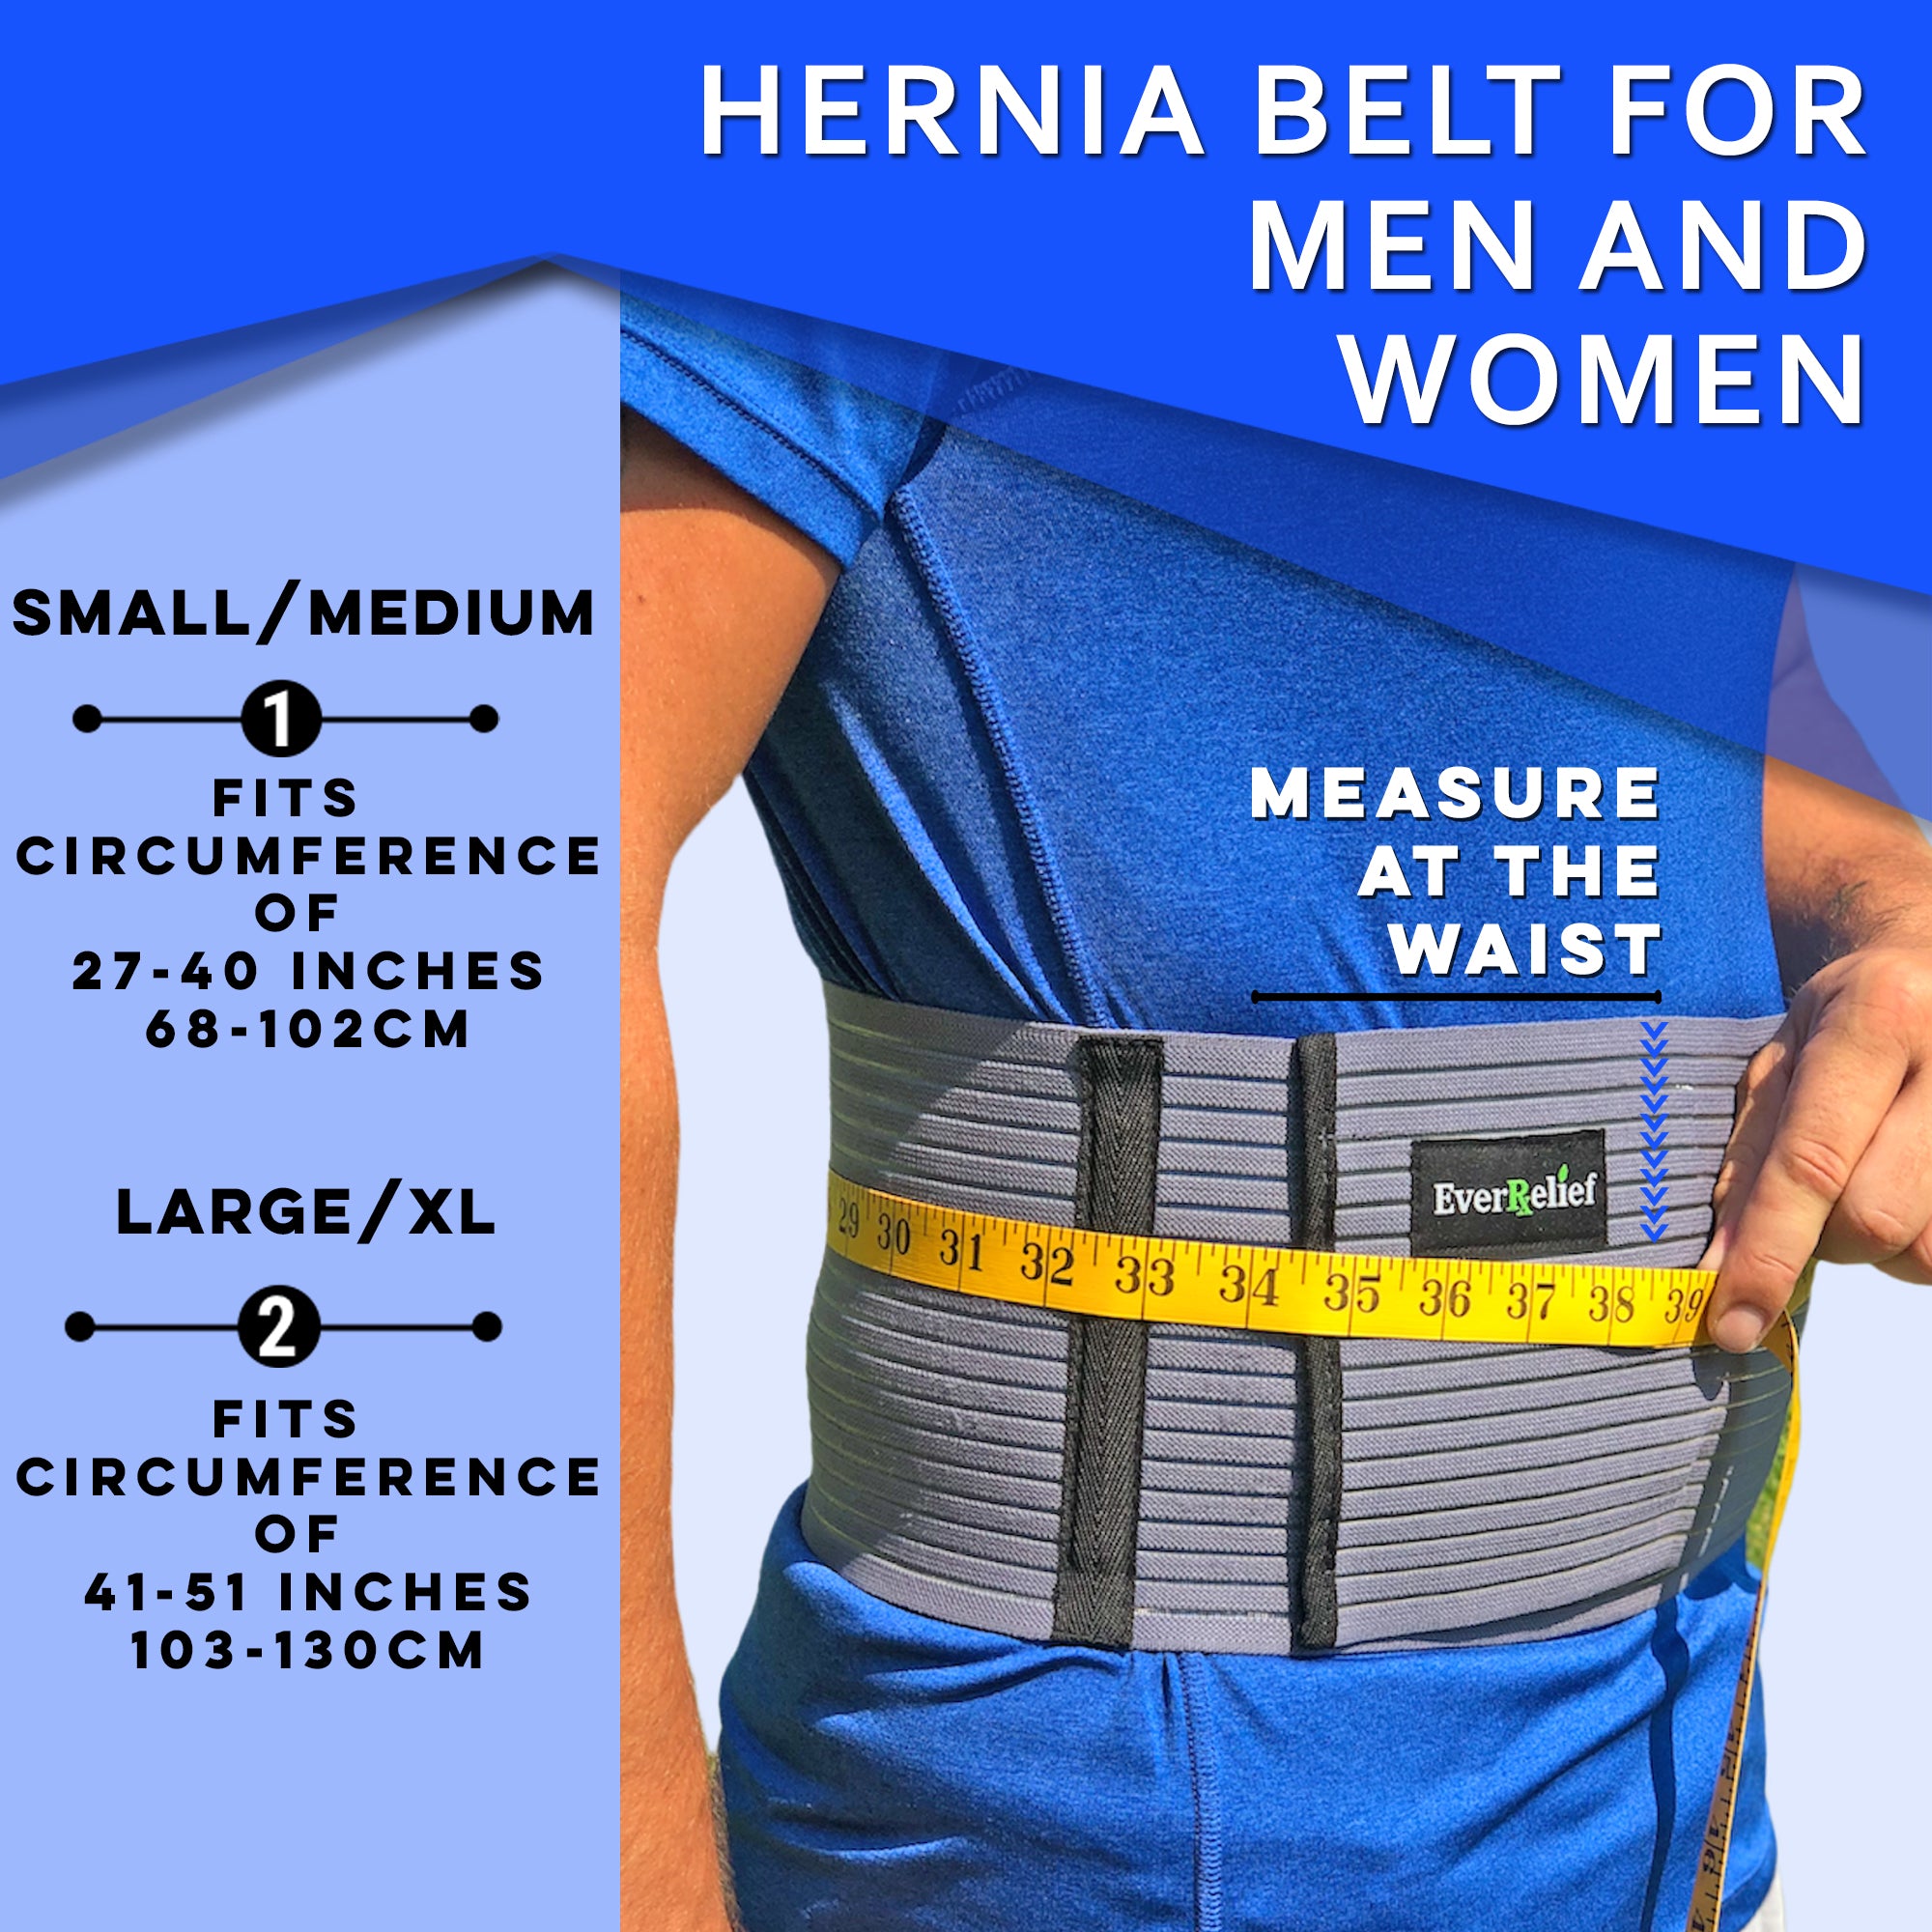 Do Hernia belts work ? Is it safe to use a Hernia Belt ?